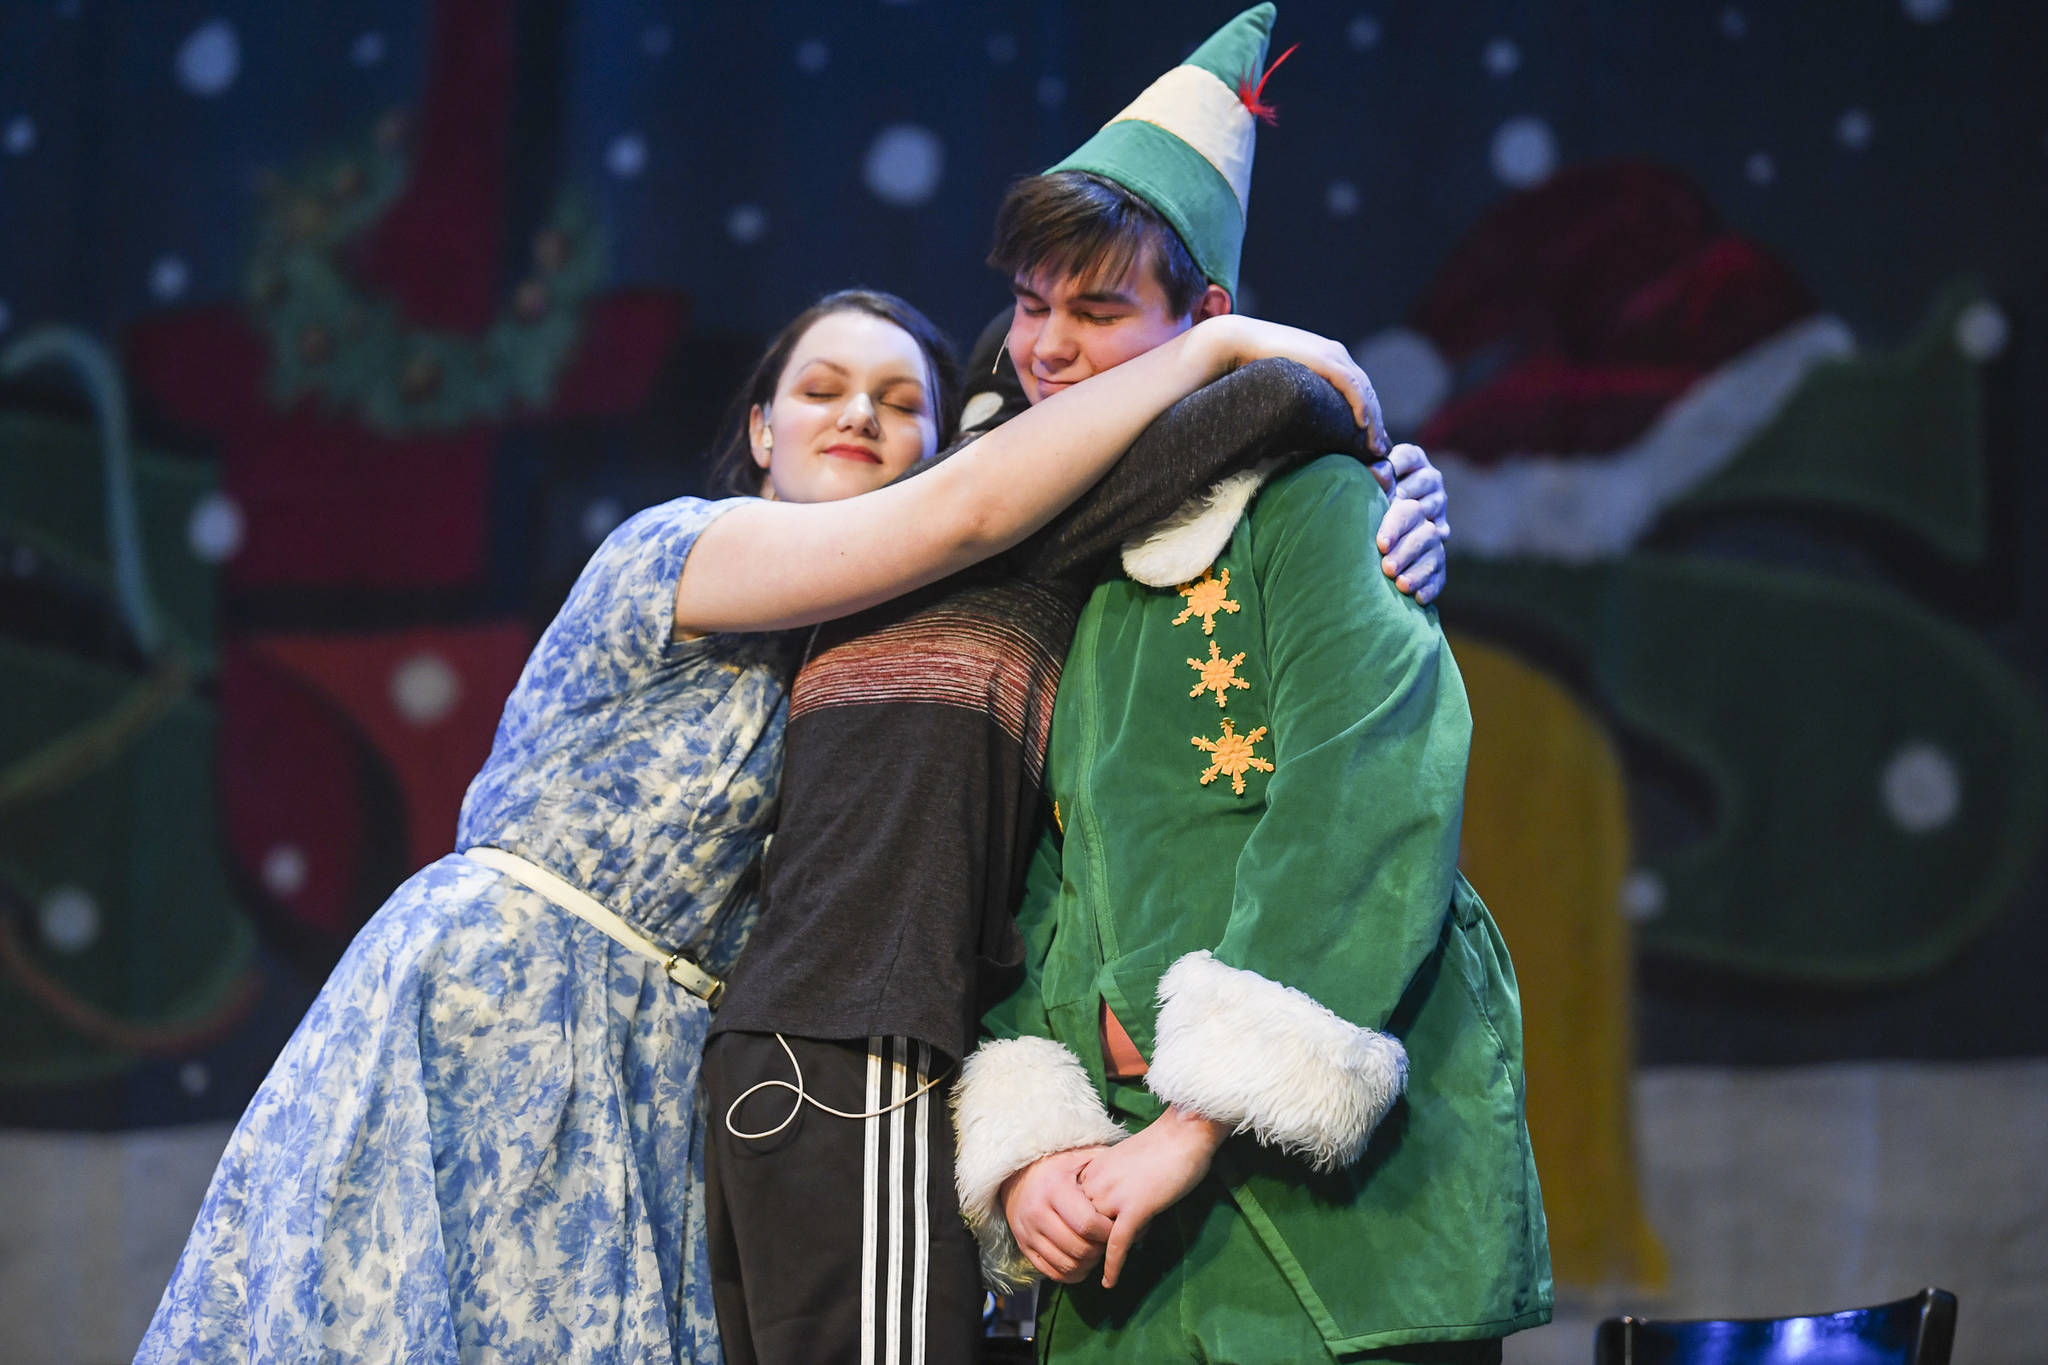 Amanda McDowell, left, Cahal Burnham and Toby Russell play the Hobbs family during the rehearsal of “Elf, the Musicial” at Juneau-Douglas High School: Yadaa.at Kalé on Friday, Dec. 13, 2019. (Michael Penn | Juneau Empire)